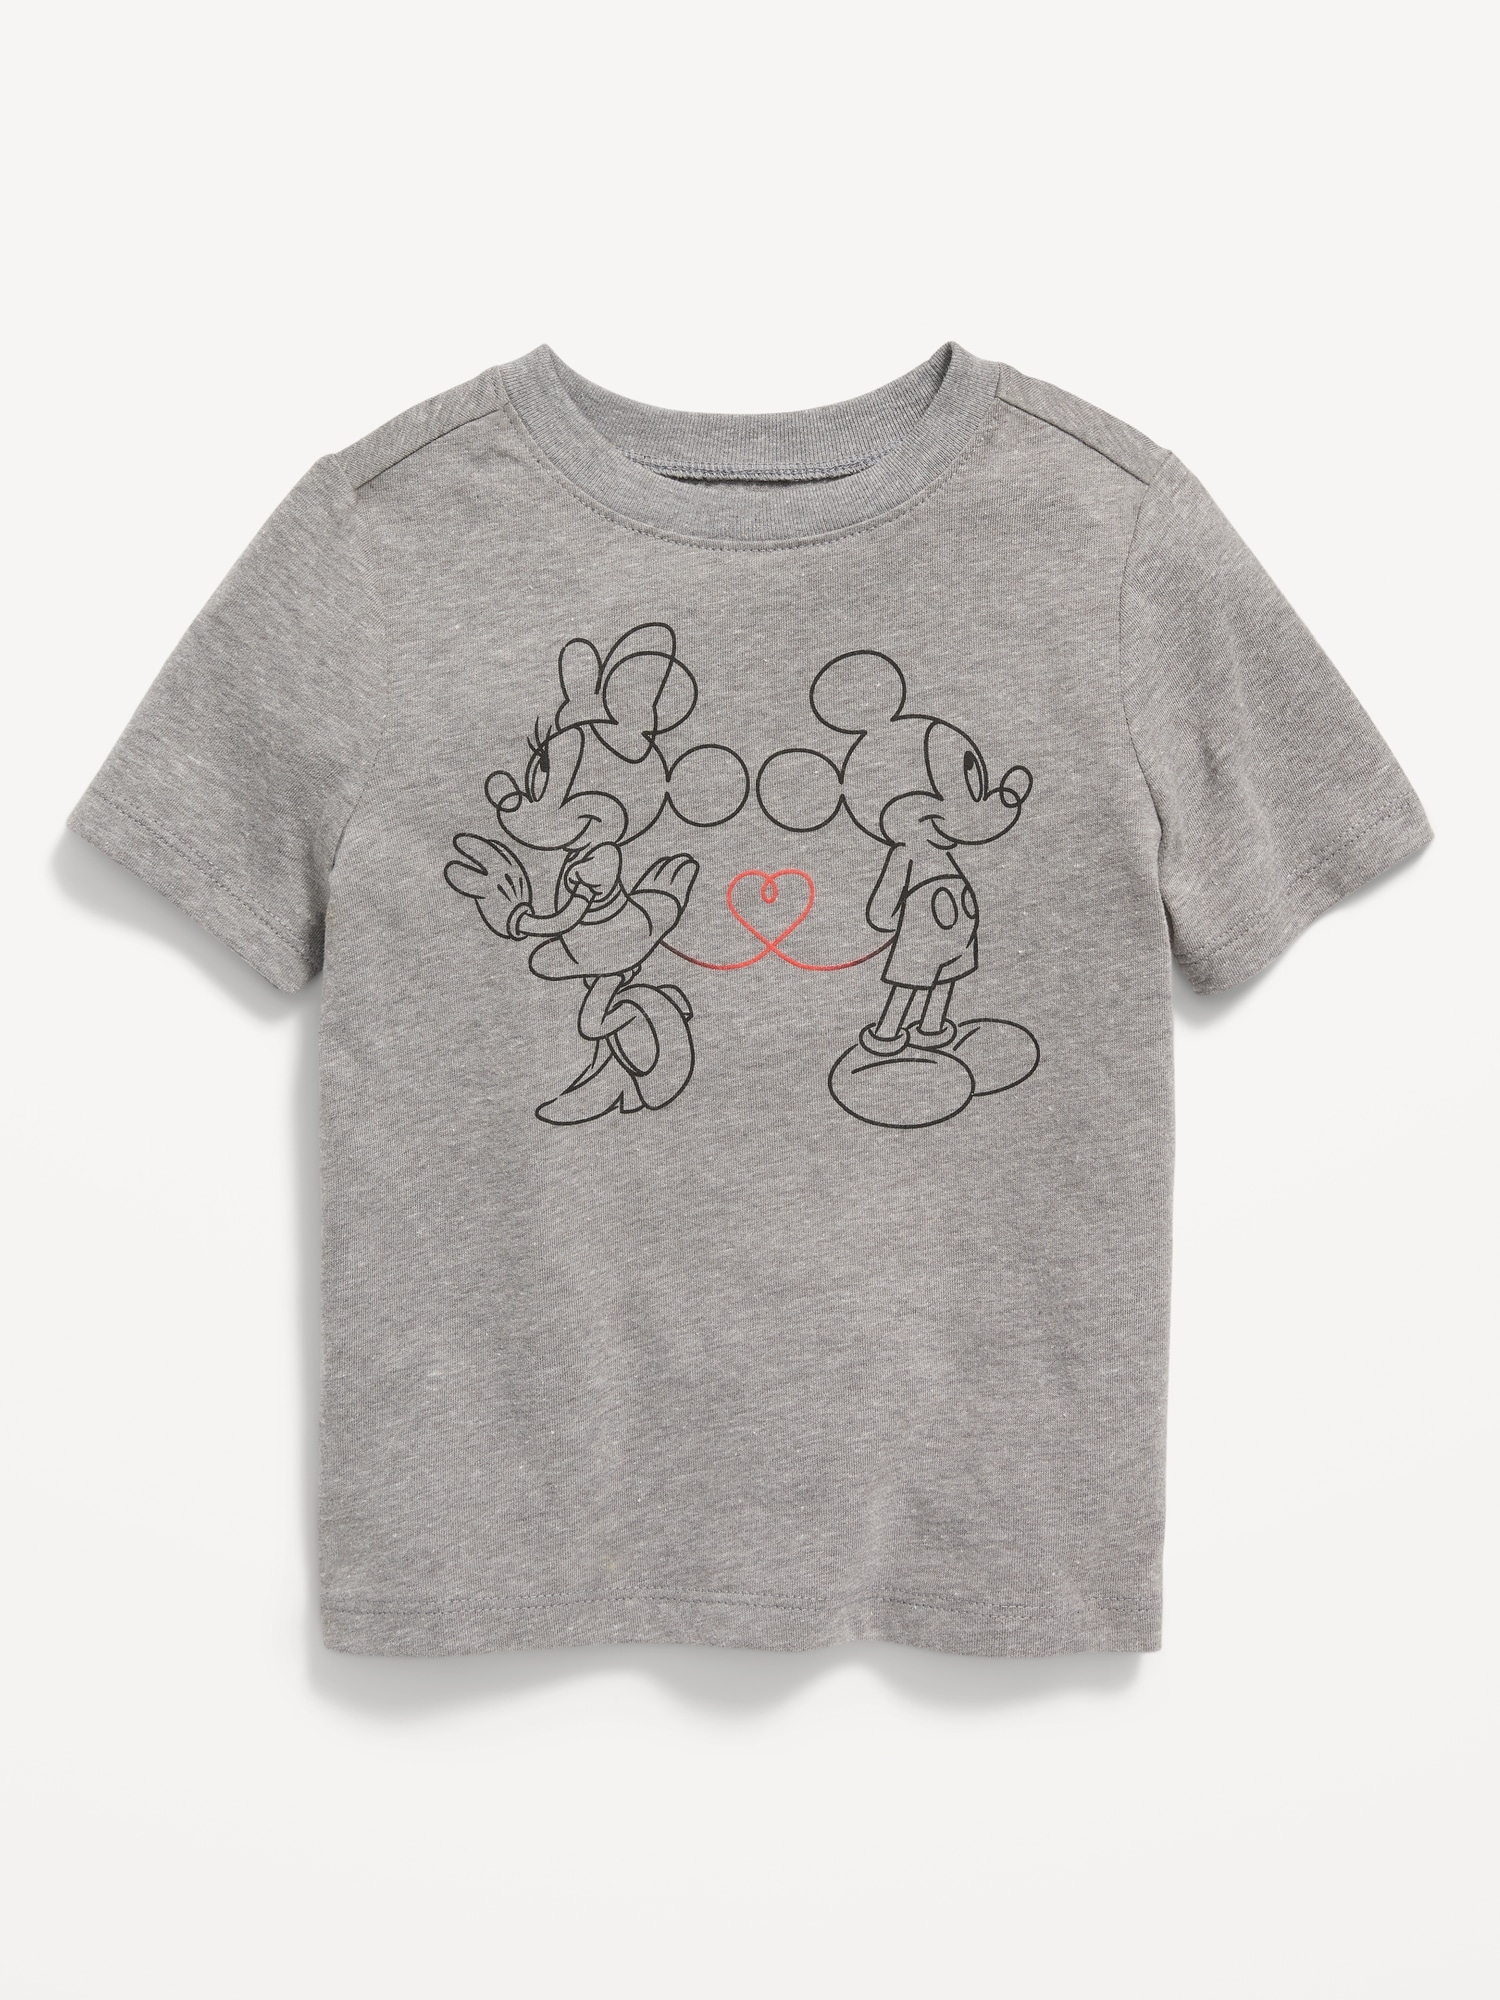 Mickey & Minnie Mouse T-Shirt Gray Back To Back Women's Plus Size Disn –  Open and Clothing